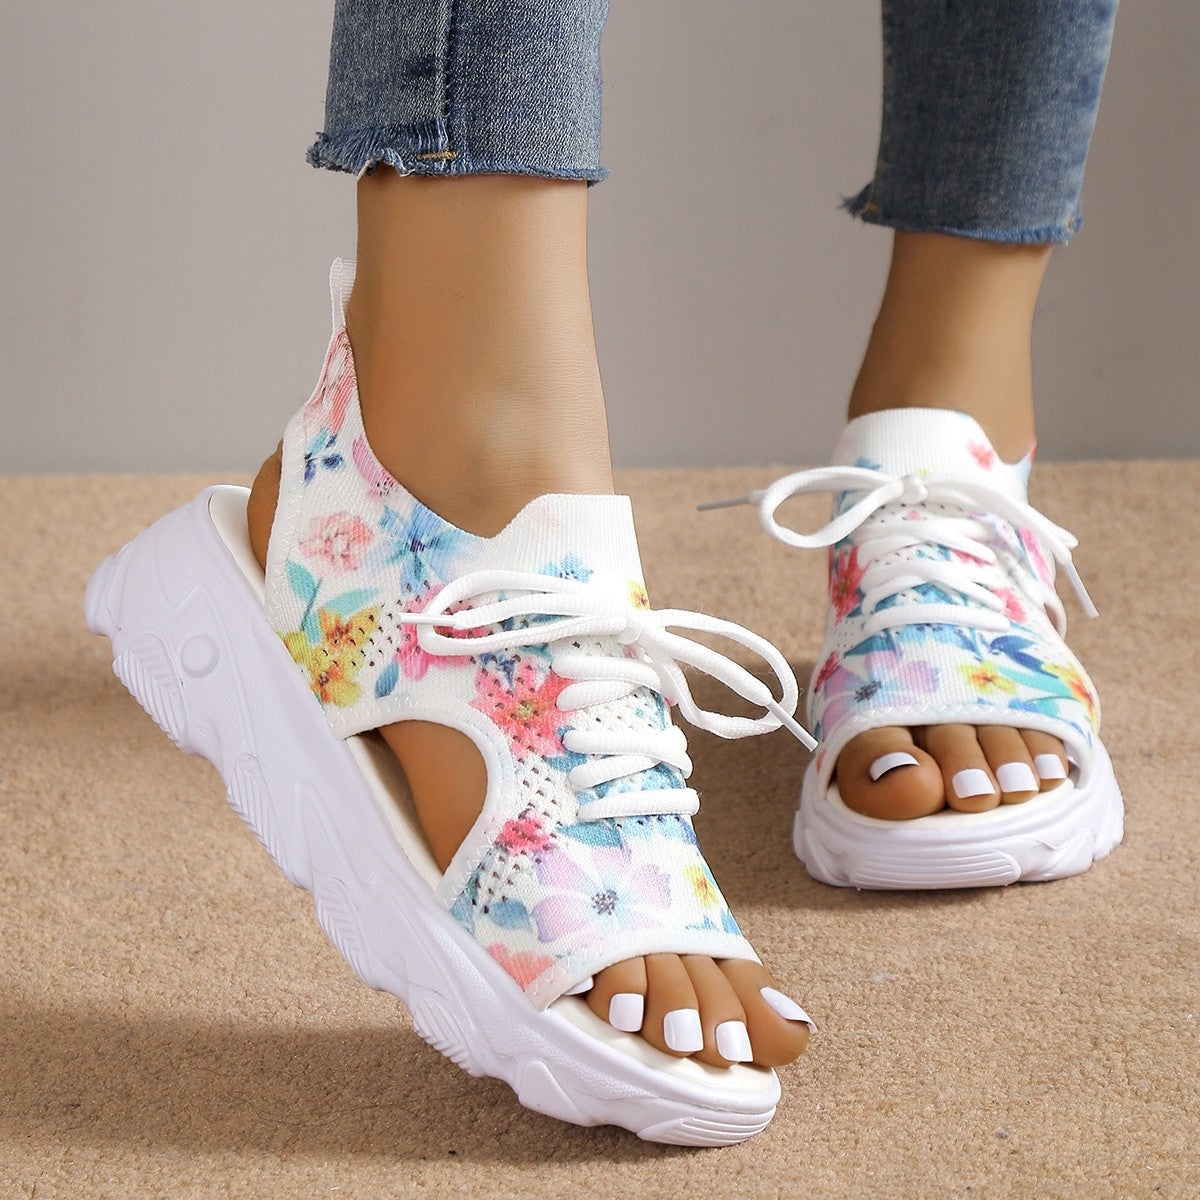 sandals  | Print Lace-up Sports Sandals Summer Peep Toe Casual Mesh Shoes | White Flower |  35.| thecurvestory.myshopify.com